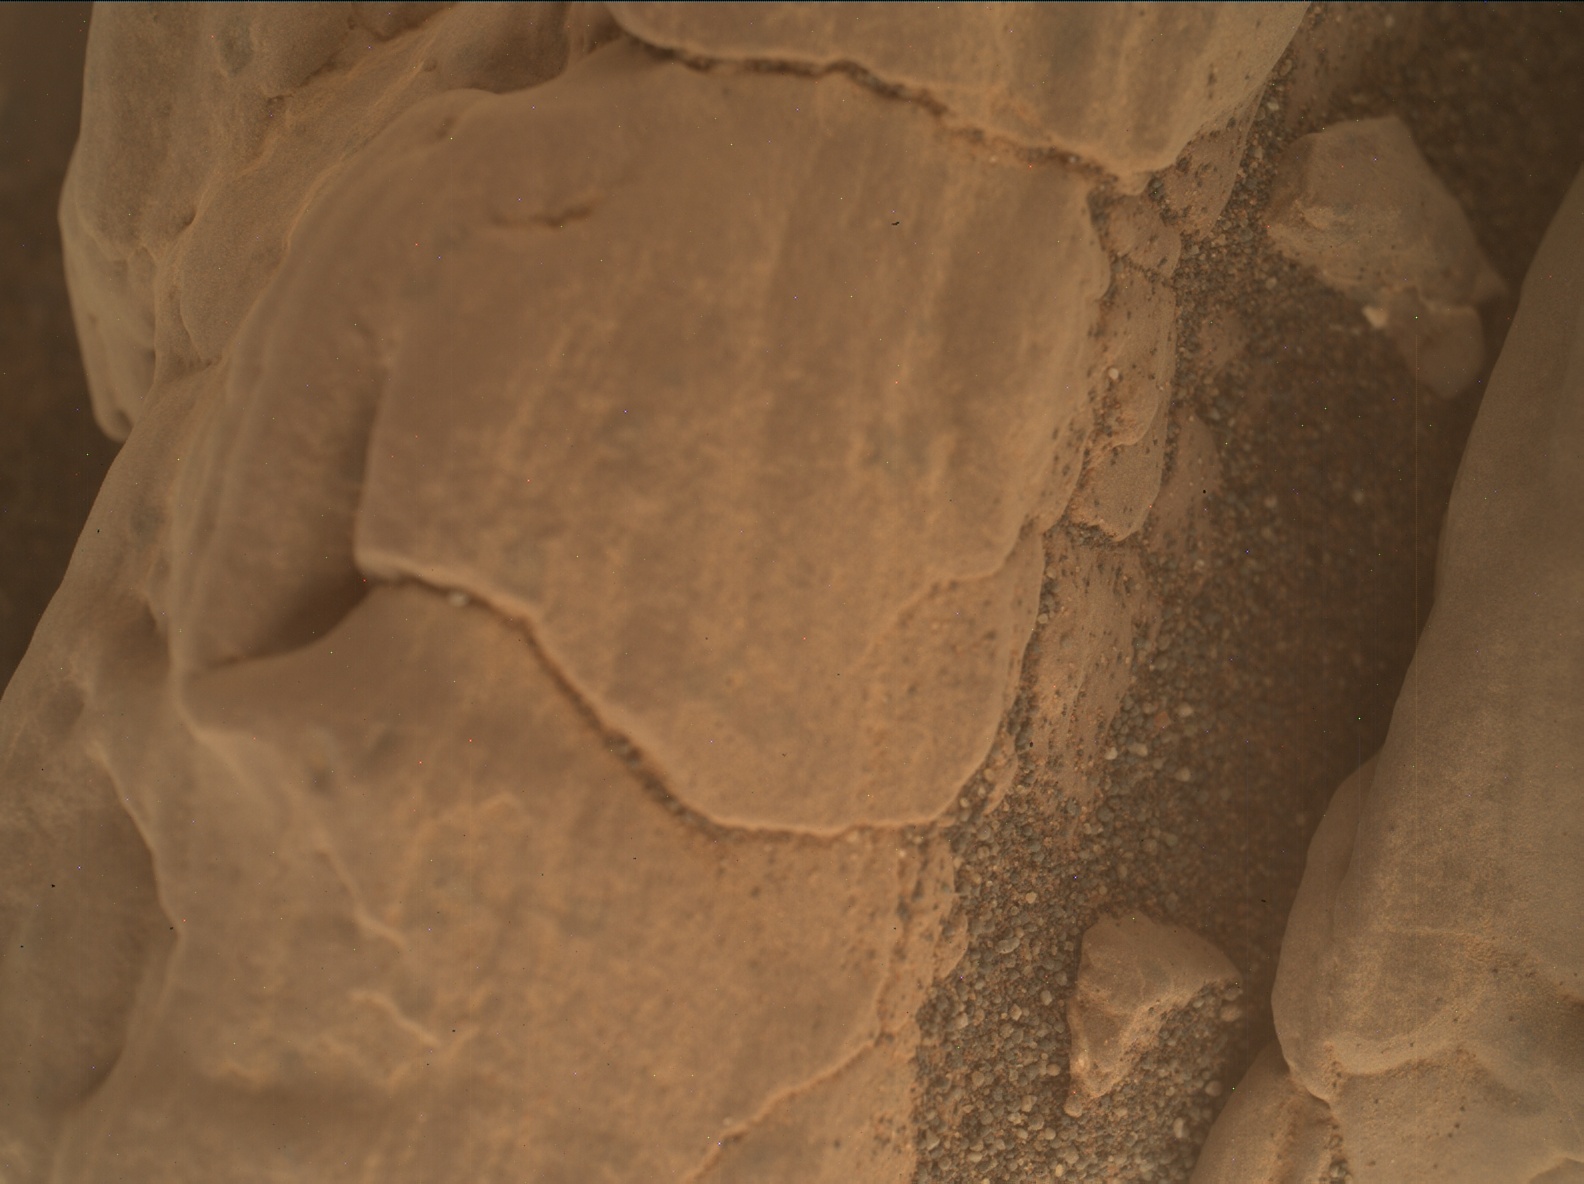 Nasa's Mars rover Curiosity acquired this image using its Mars Hand Lens Imager (MAHLI) on Sol 2942